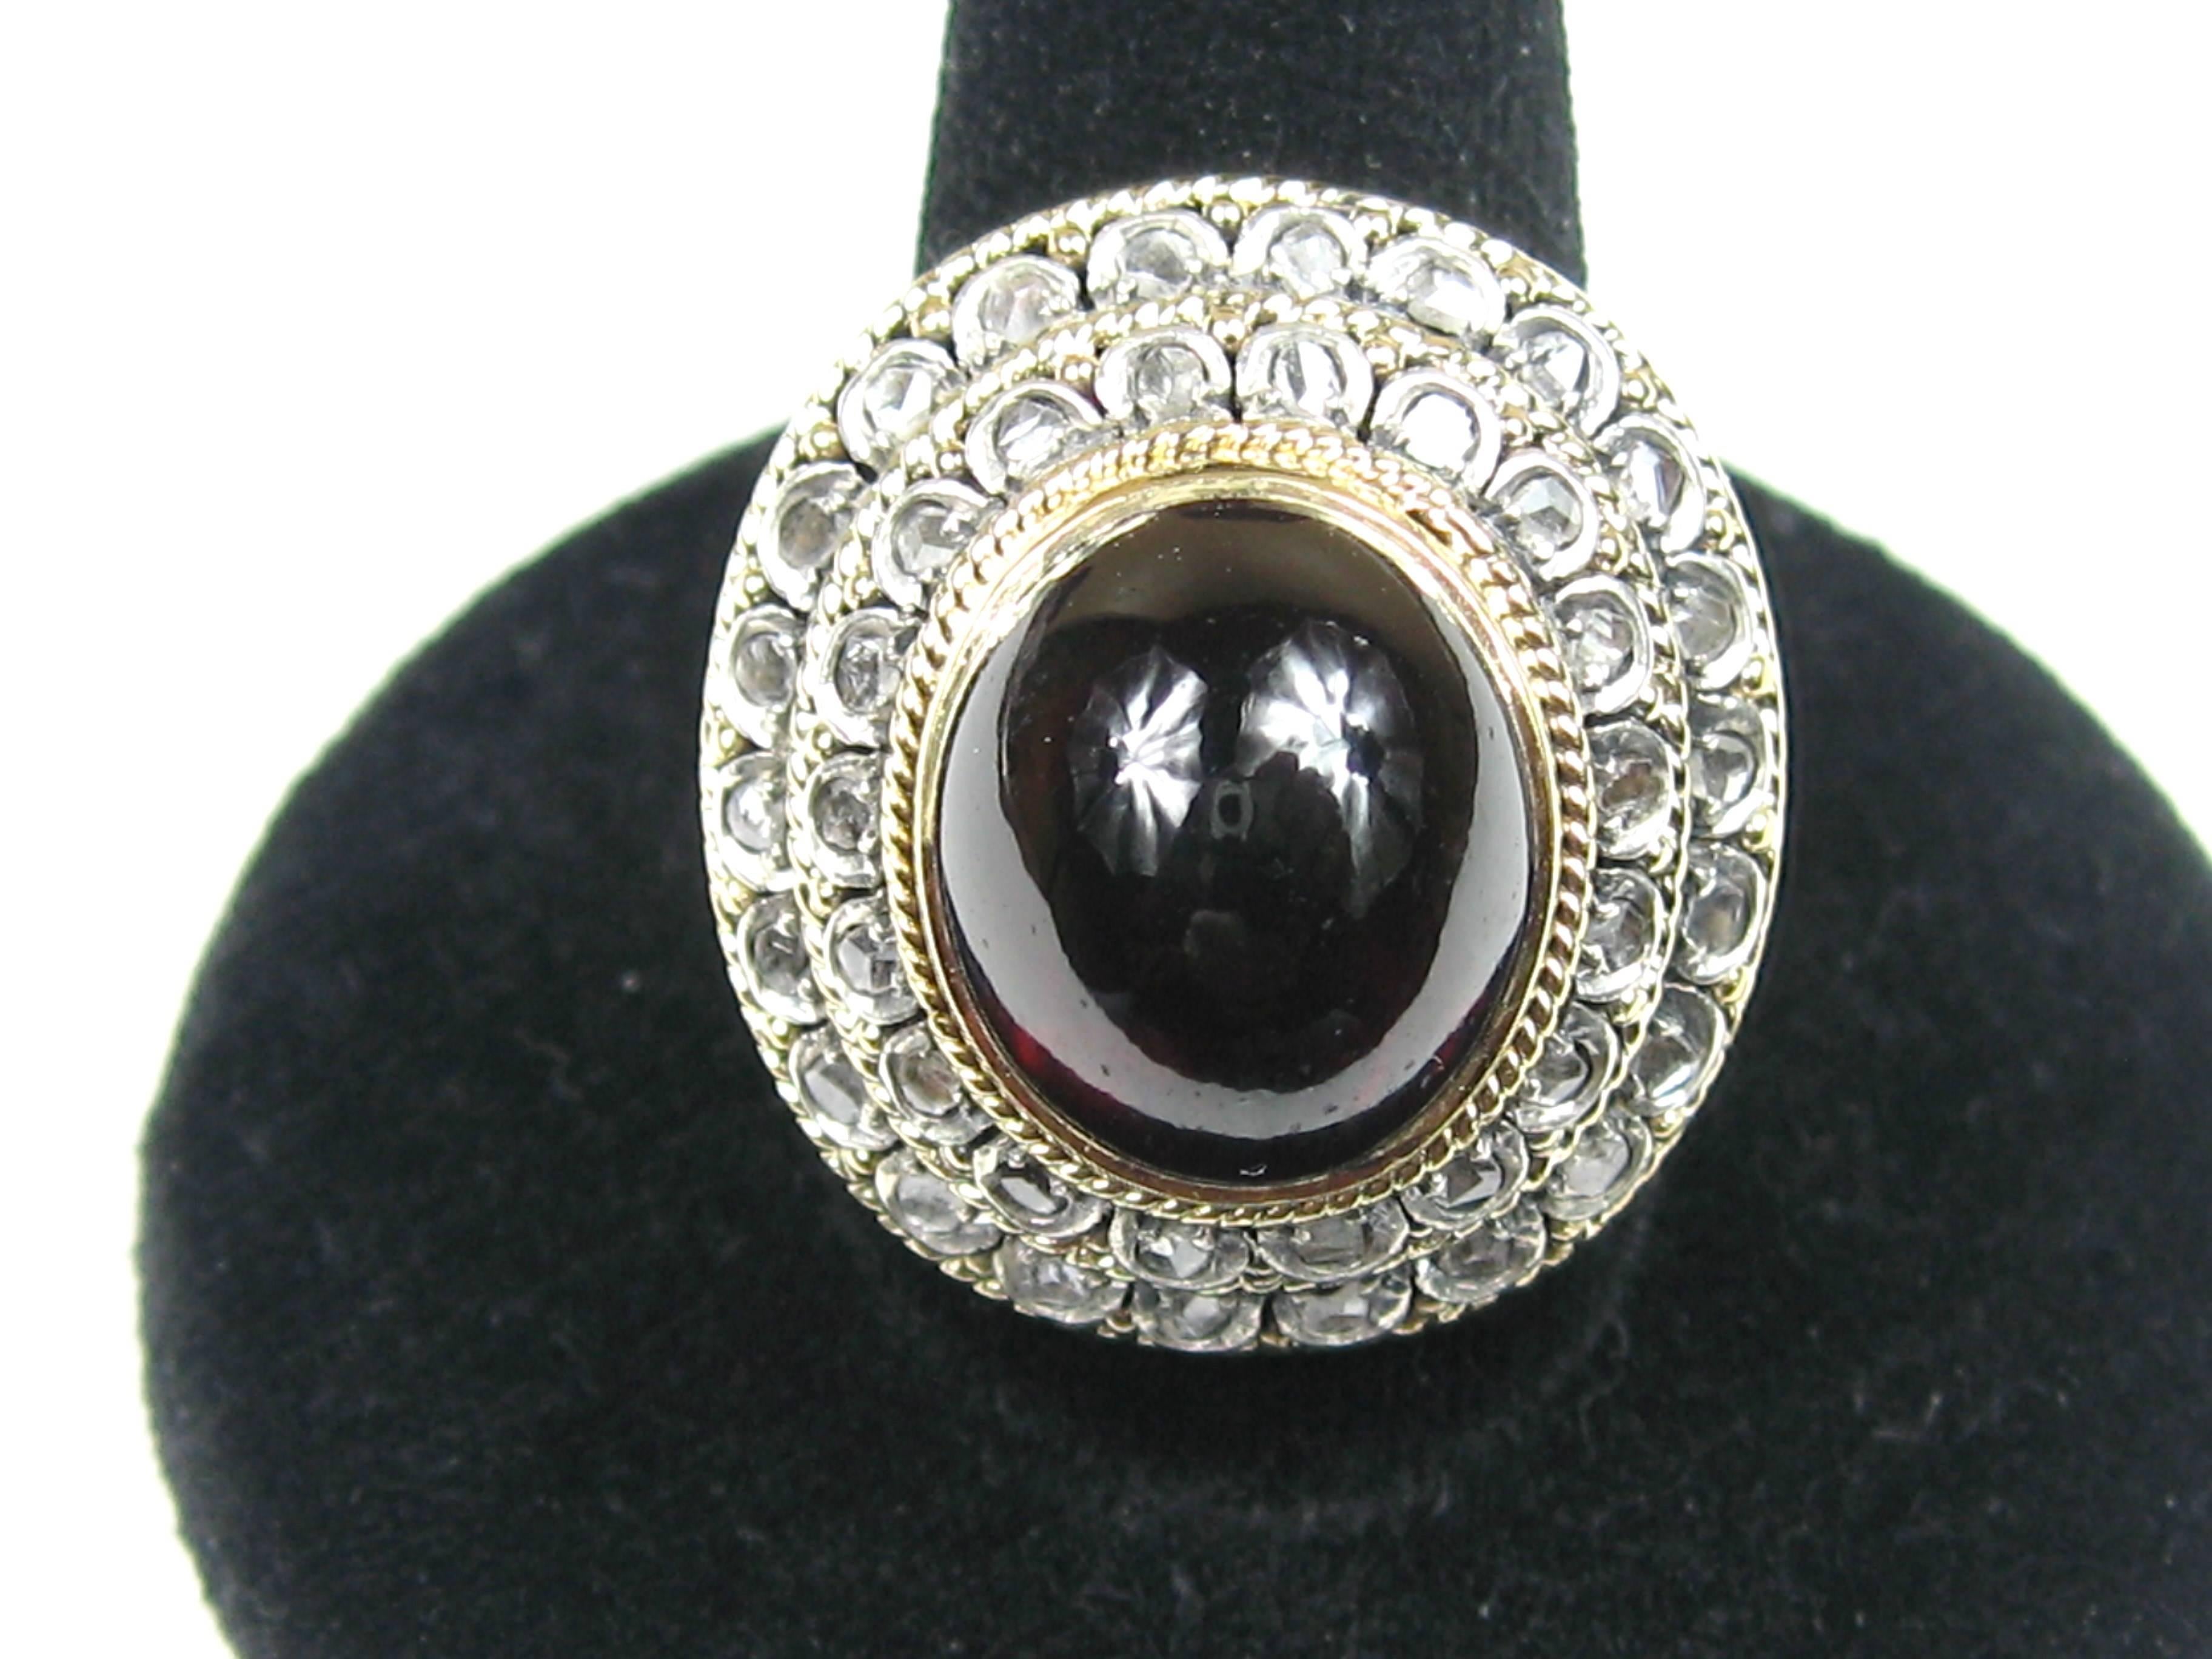 A Spectacular 18K Gold Garnet Ring. Large Cabochon Garnet center with 2 tiers of mine cut diamonds surrounding. The shank has elaborate cuts. The underside of the ring is decorated as well, this is a spectacular piece! The Diamonds are set in White